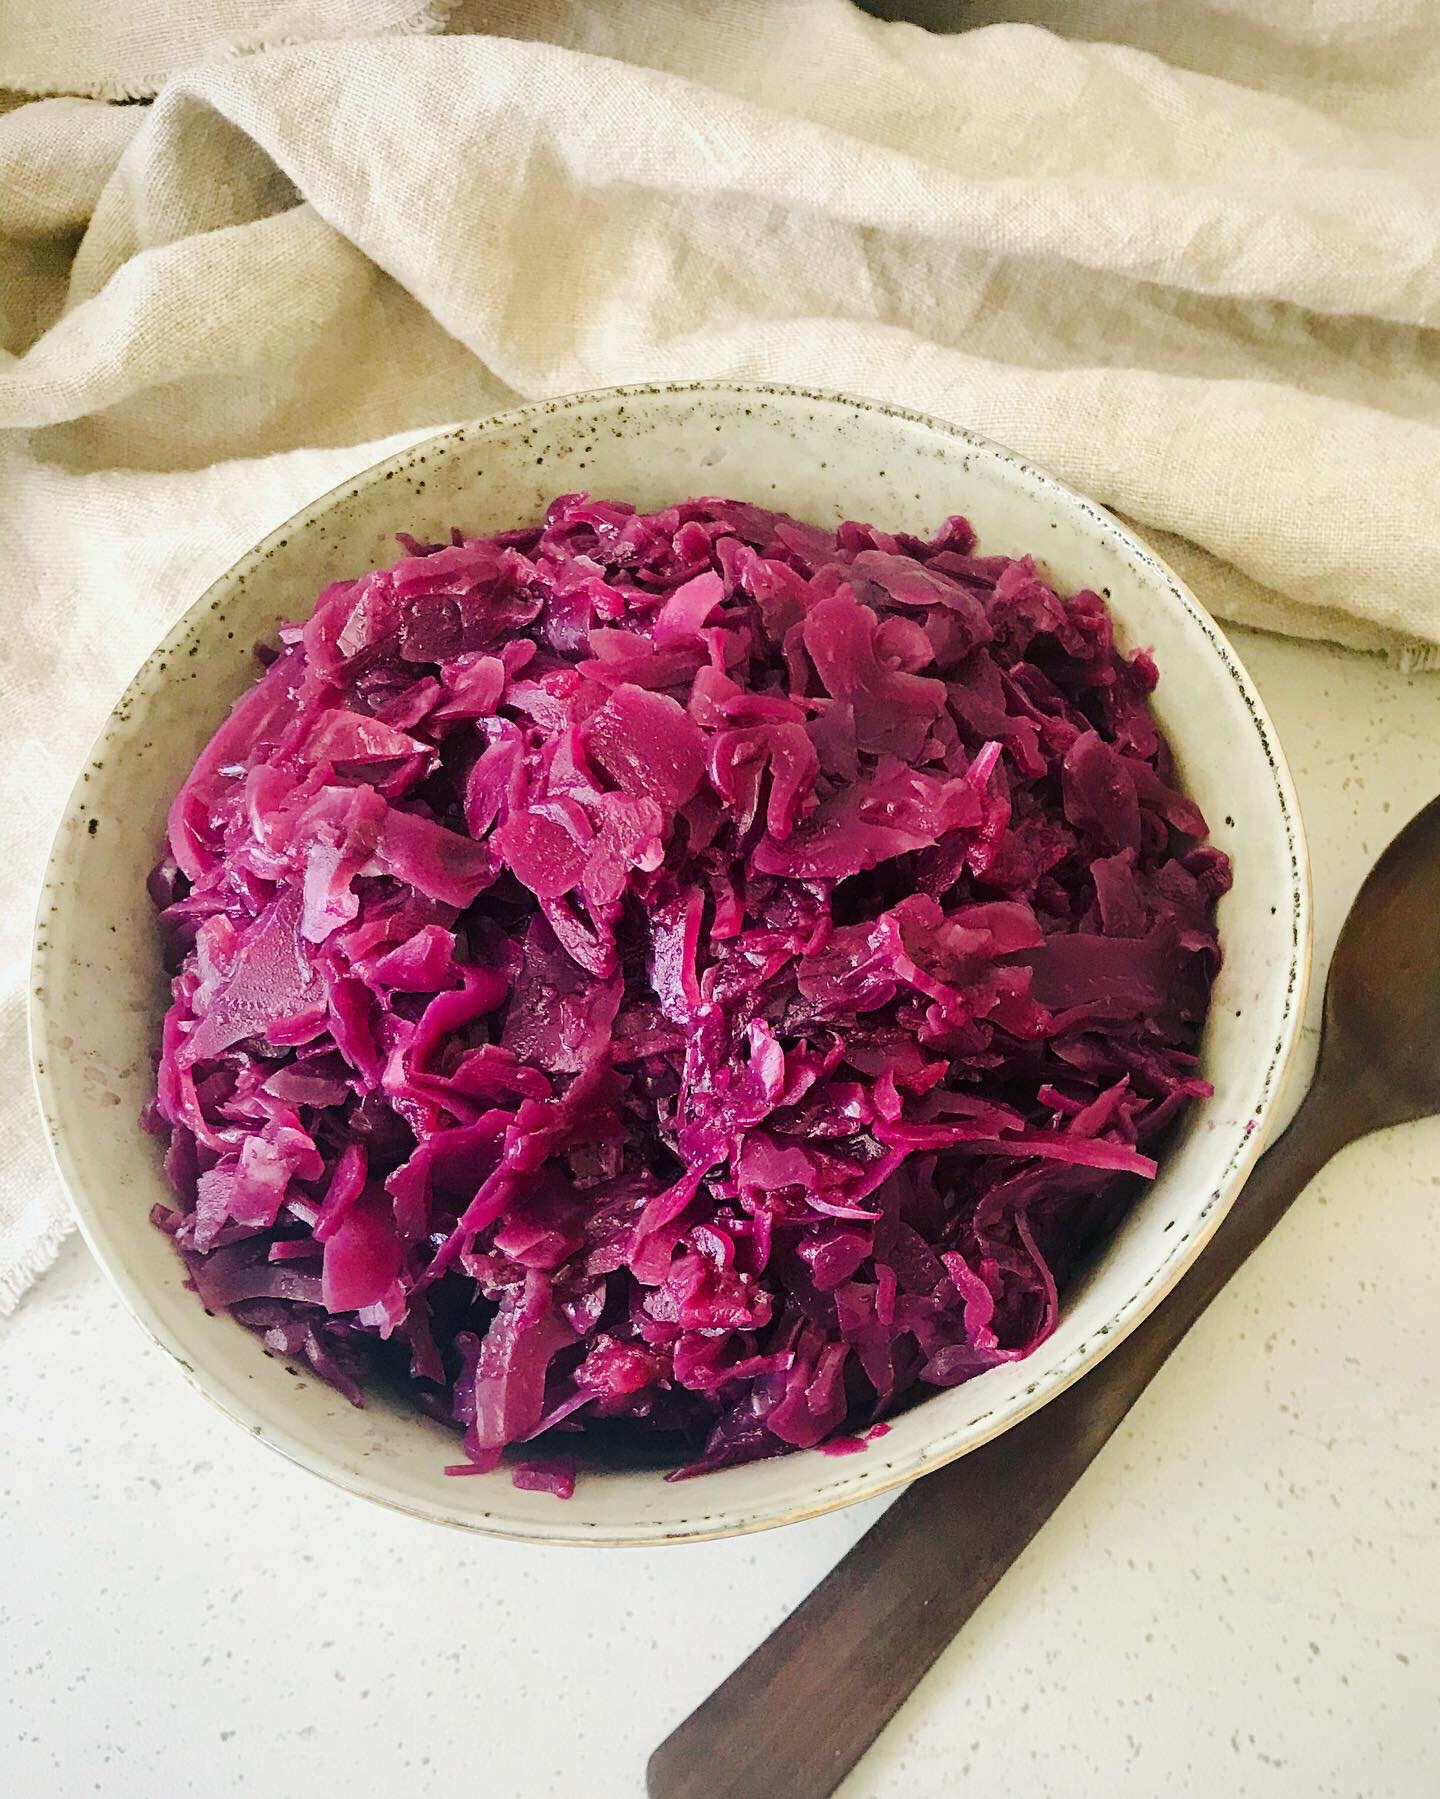 Braised Red Cabbage Read Recipes by Foreman